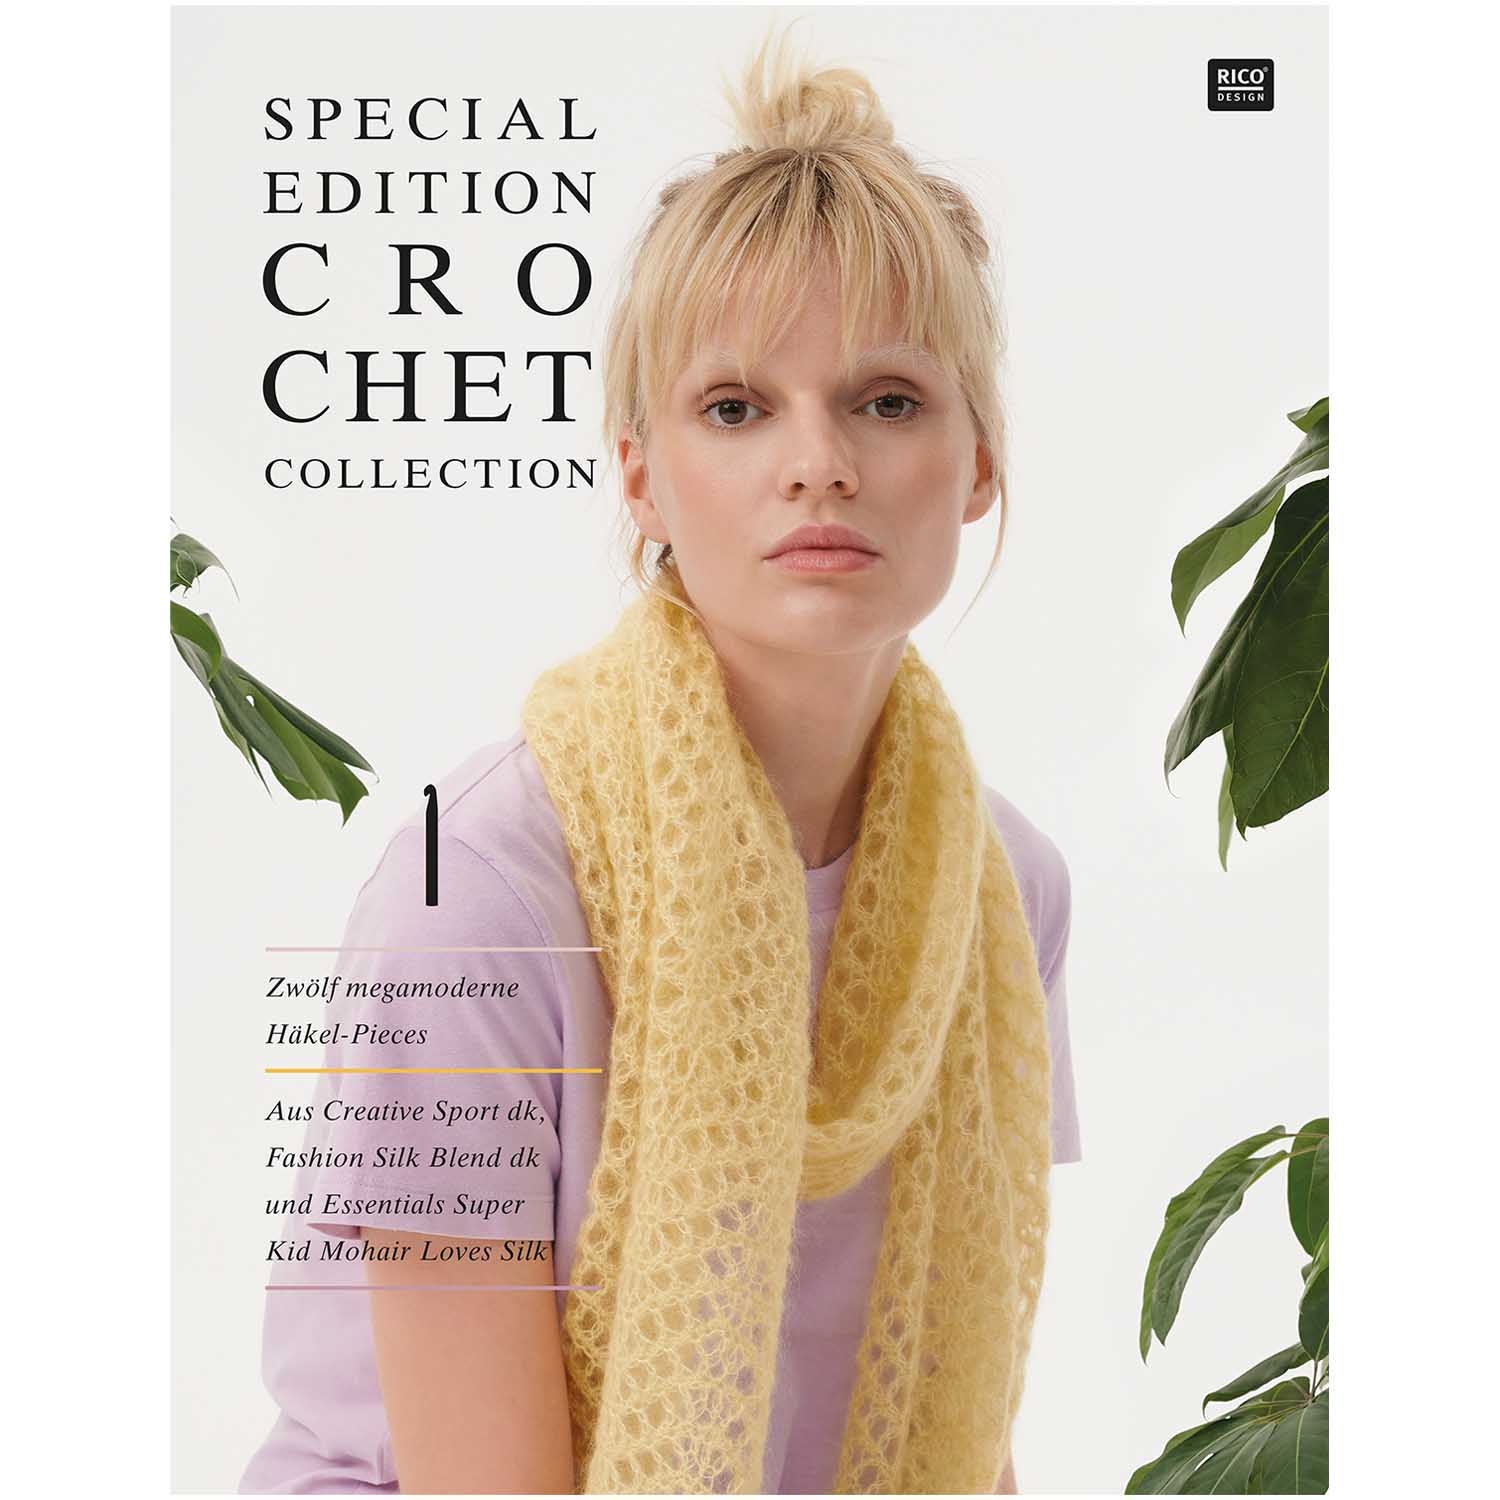 Special edition Crochet colletion